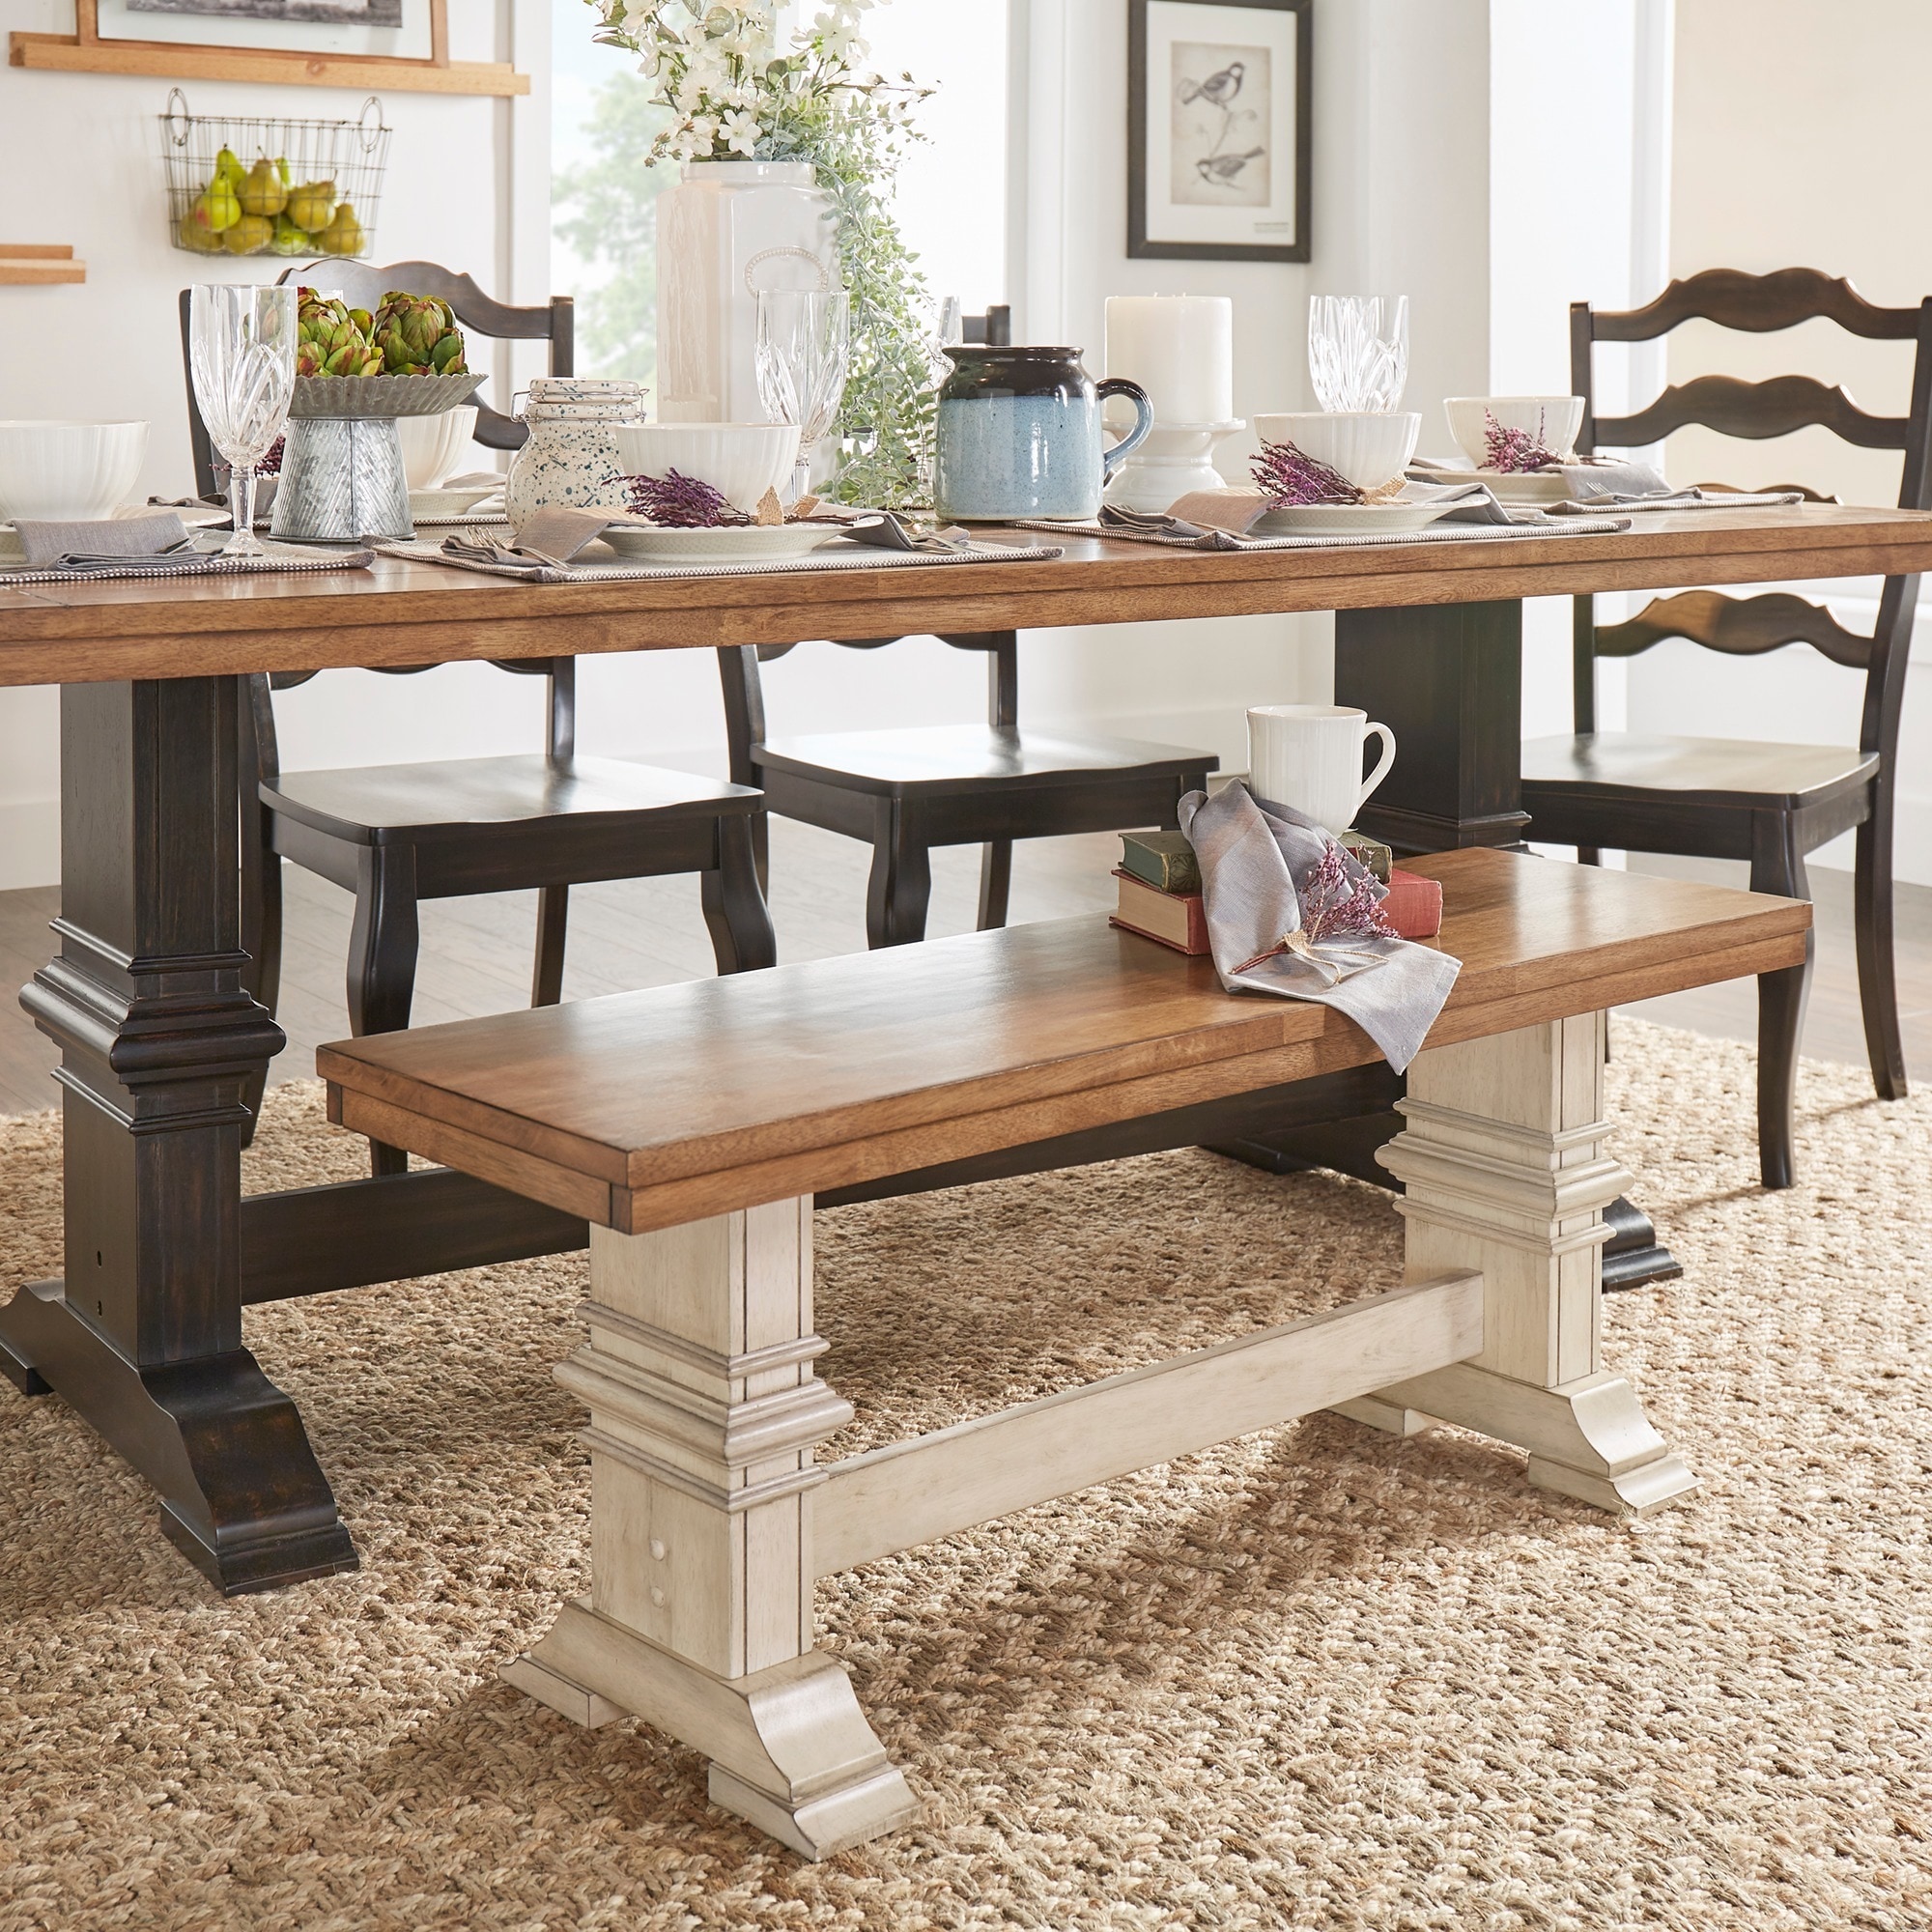 Eleanor Two Tone Trestle Leg Wood Dining Bench By Inspire Q Classic Ebay